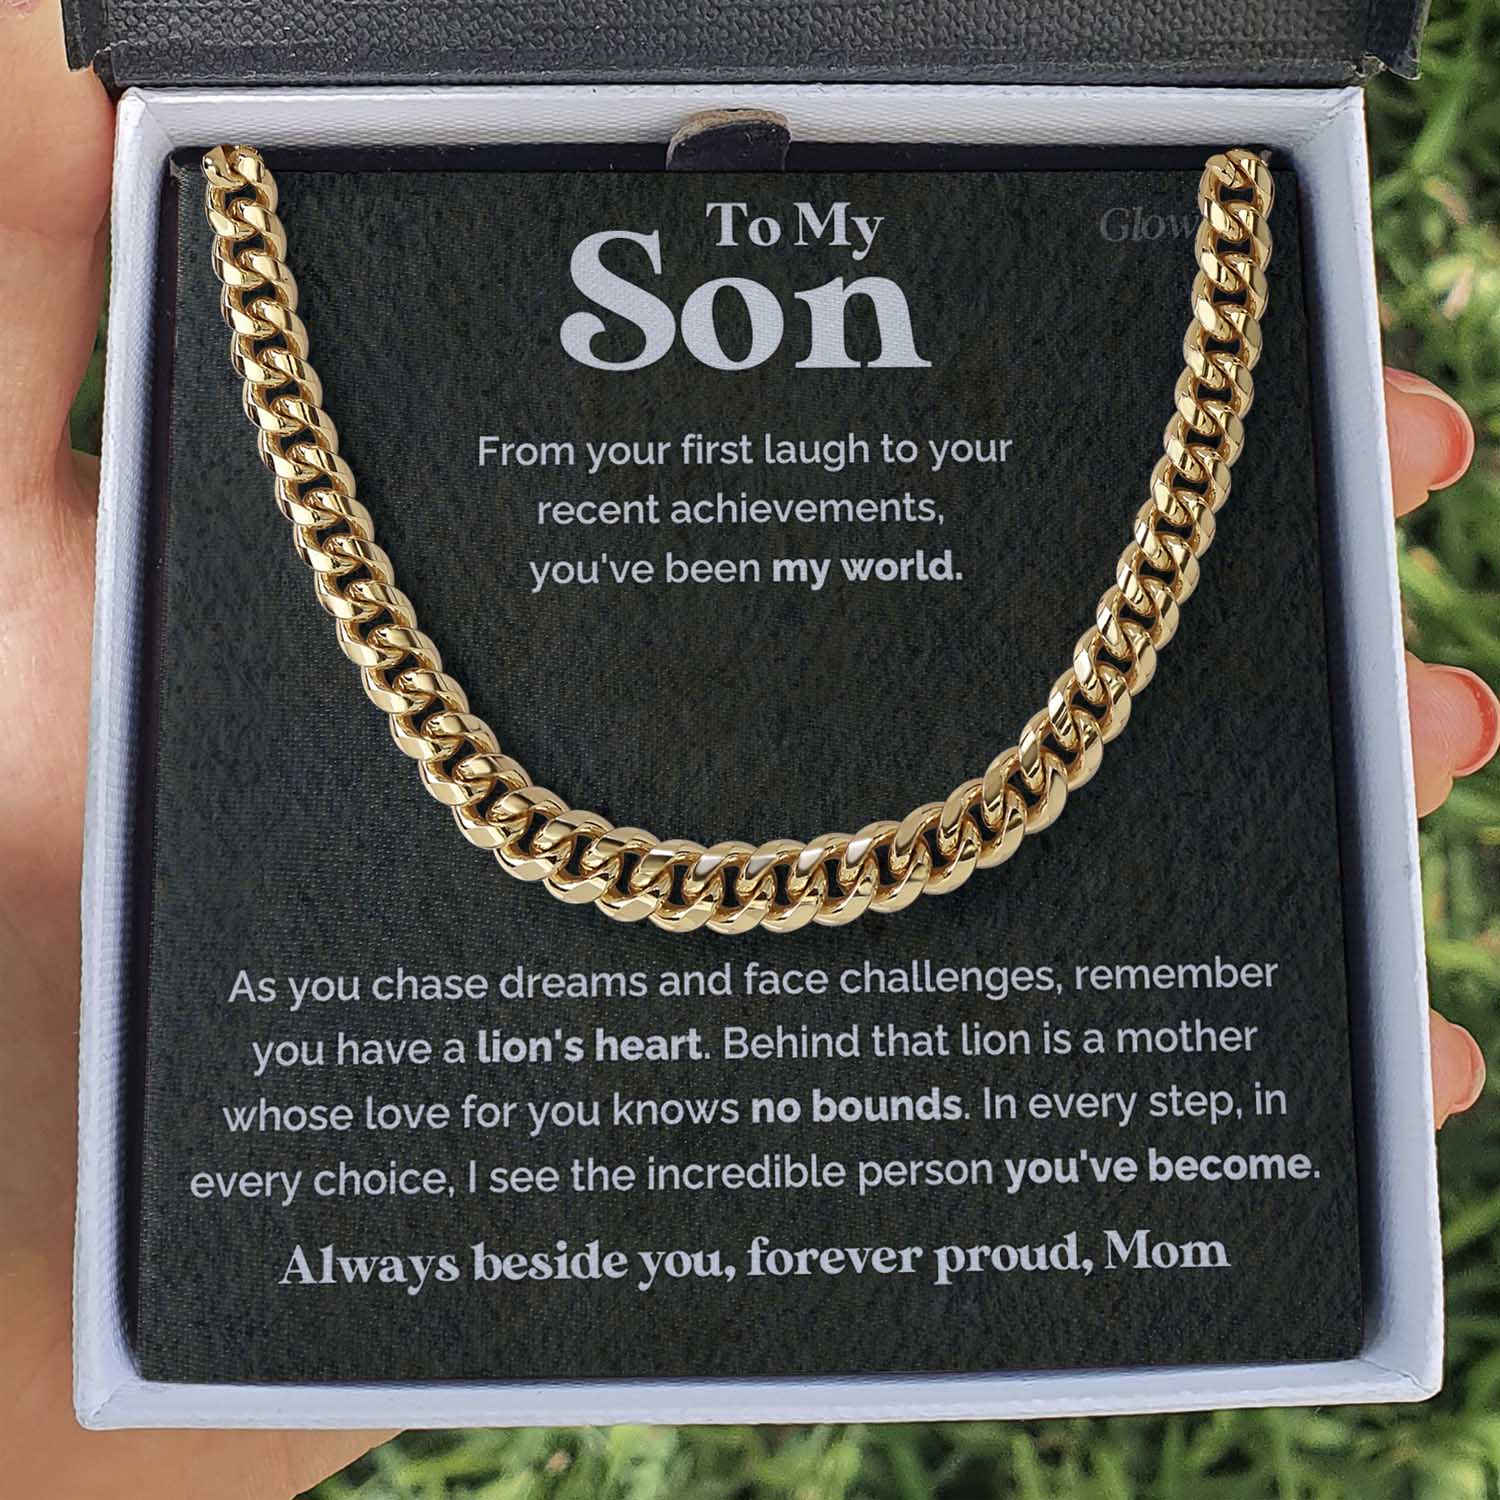 ShineOn Fulfillment Jewelry 14K Yellow Gold Finish / Standard Box To my Son from Mom - Lion's heart - 5mm Cuban Link Chain